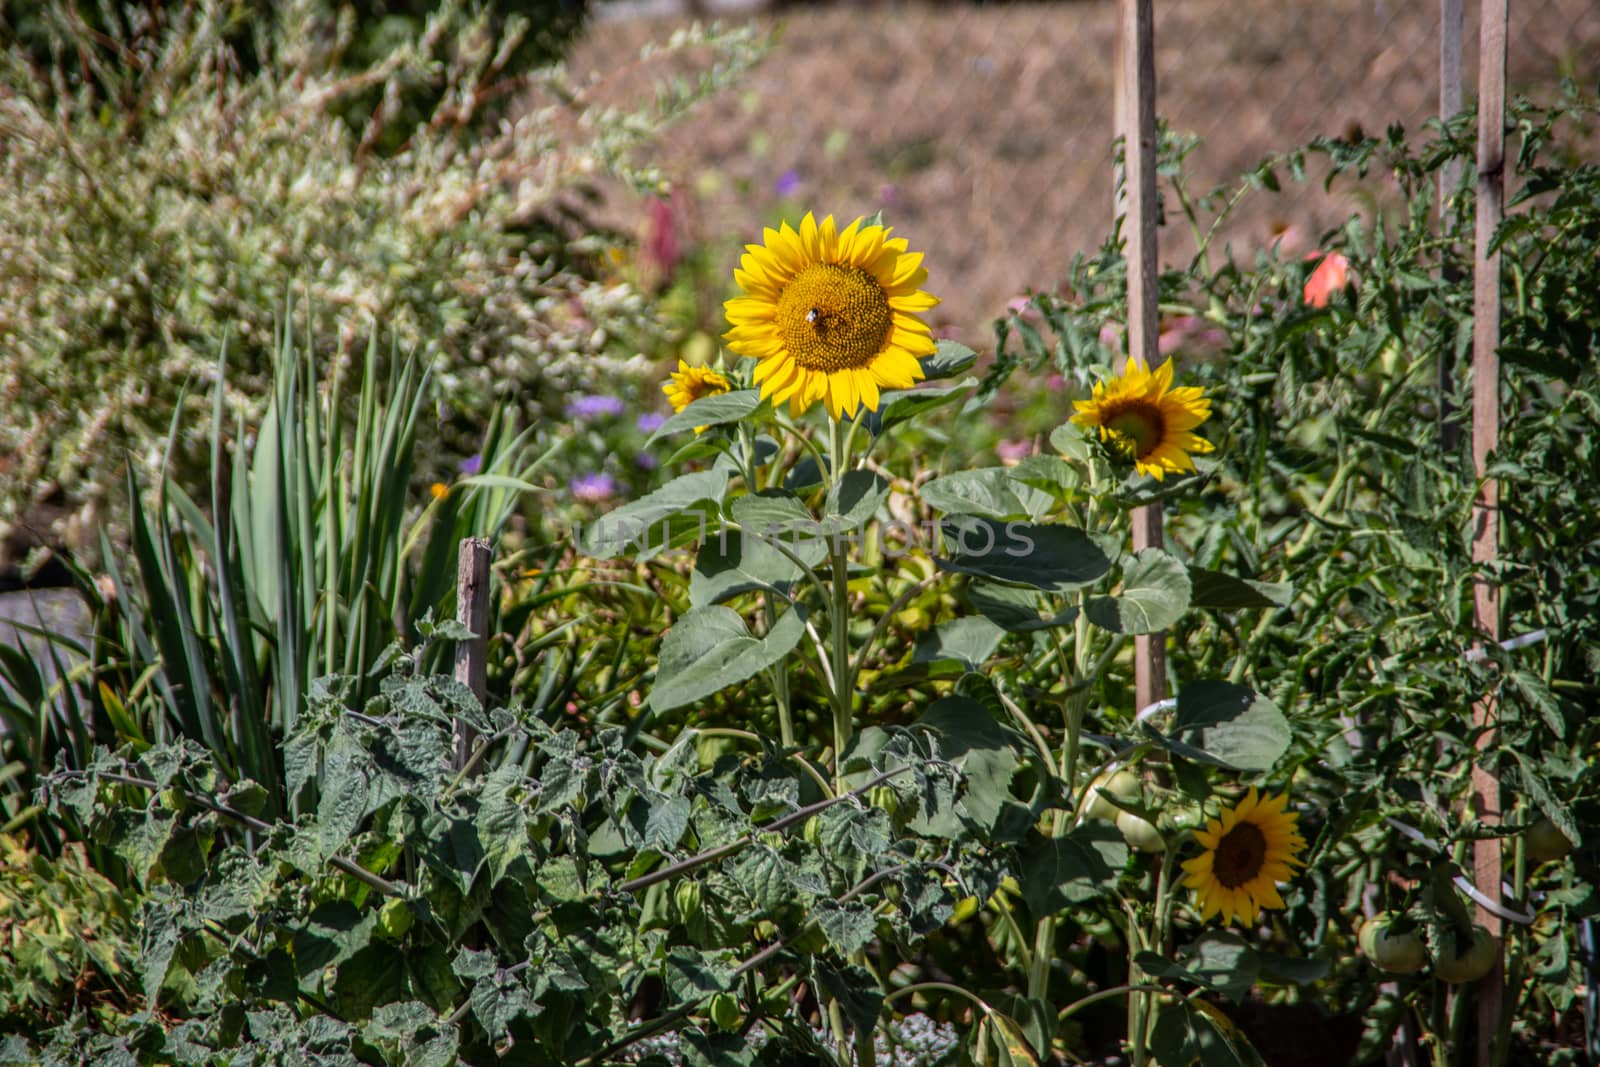 Allotment with herbaceous blooming sunflowers